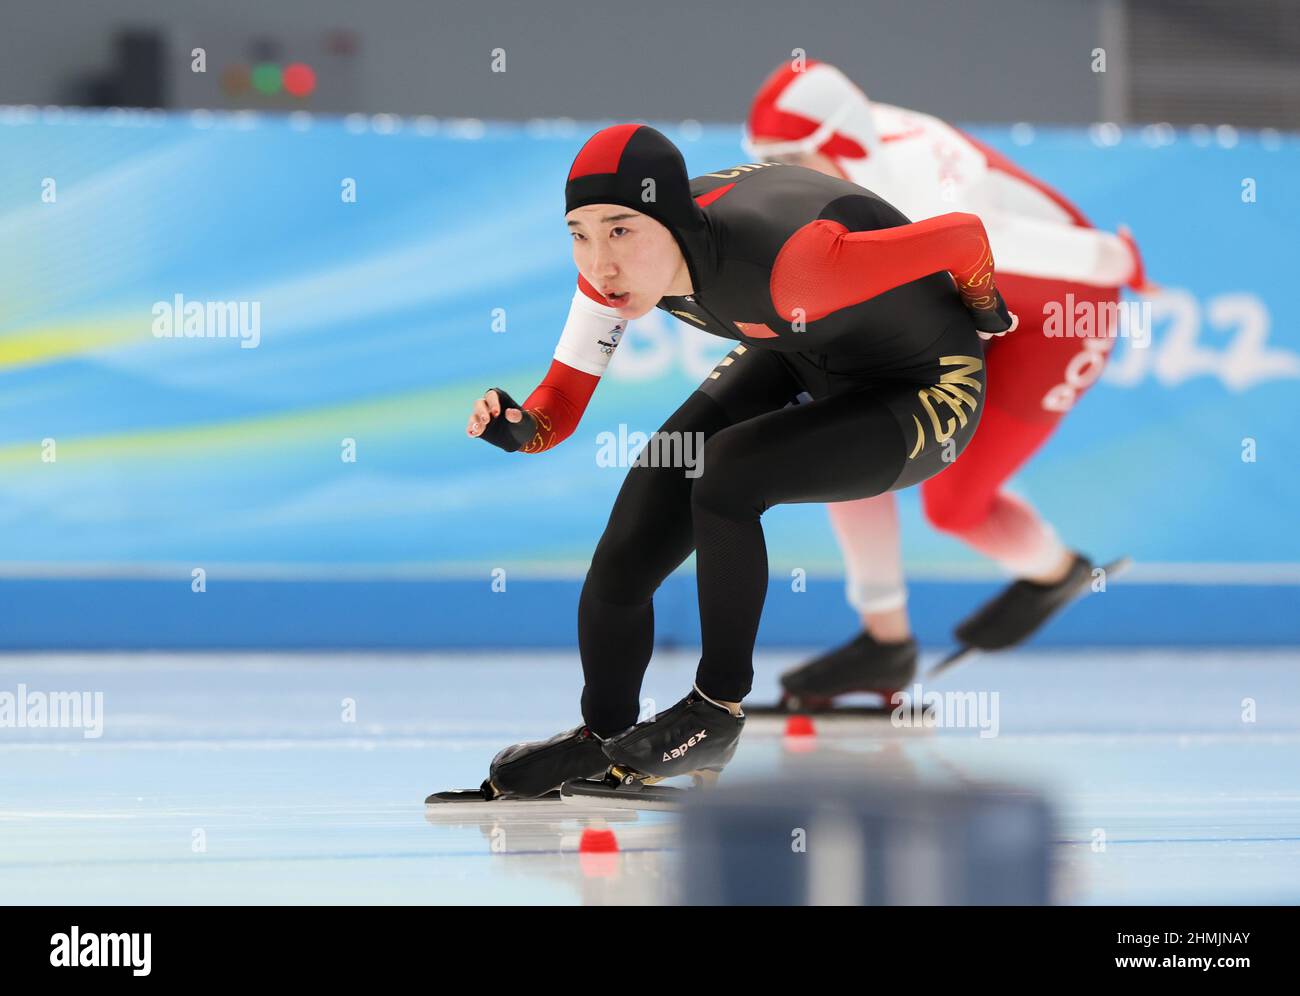 Beijing, China. 10th Feb, 2022. Han Mei of China competes during the speed skating women's 5,000m event at the National Speed Skating Oval in Beijing, capital of China, Feb. 10, 2022. Credit: Cheng Tingting/Xinhua/Alamy Live News Stock Photo